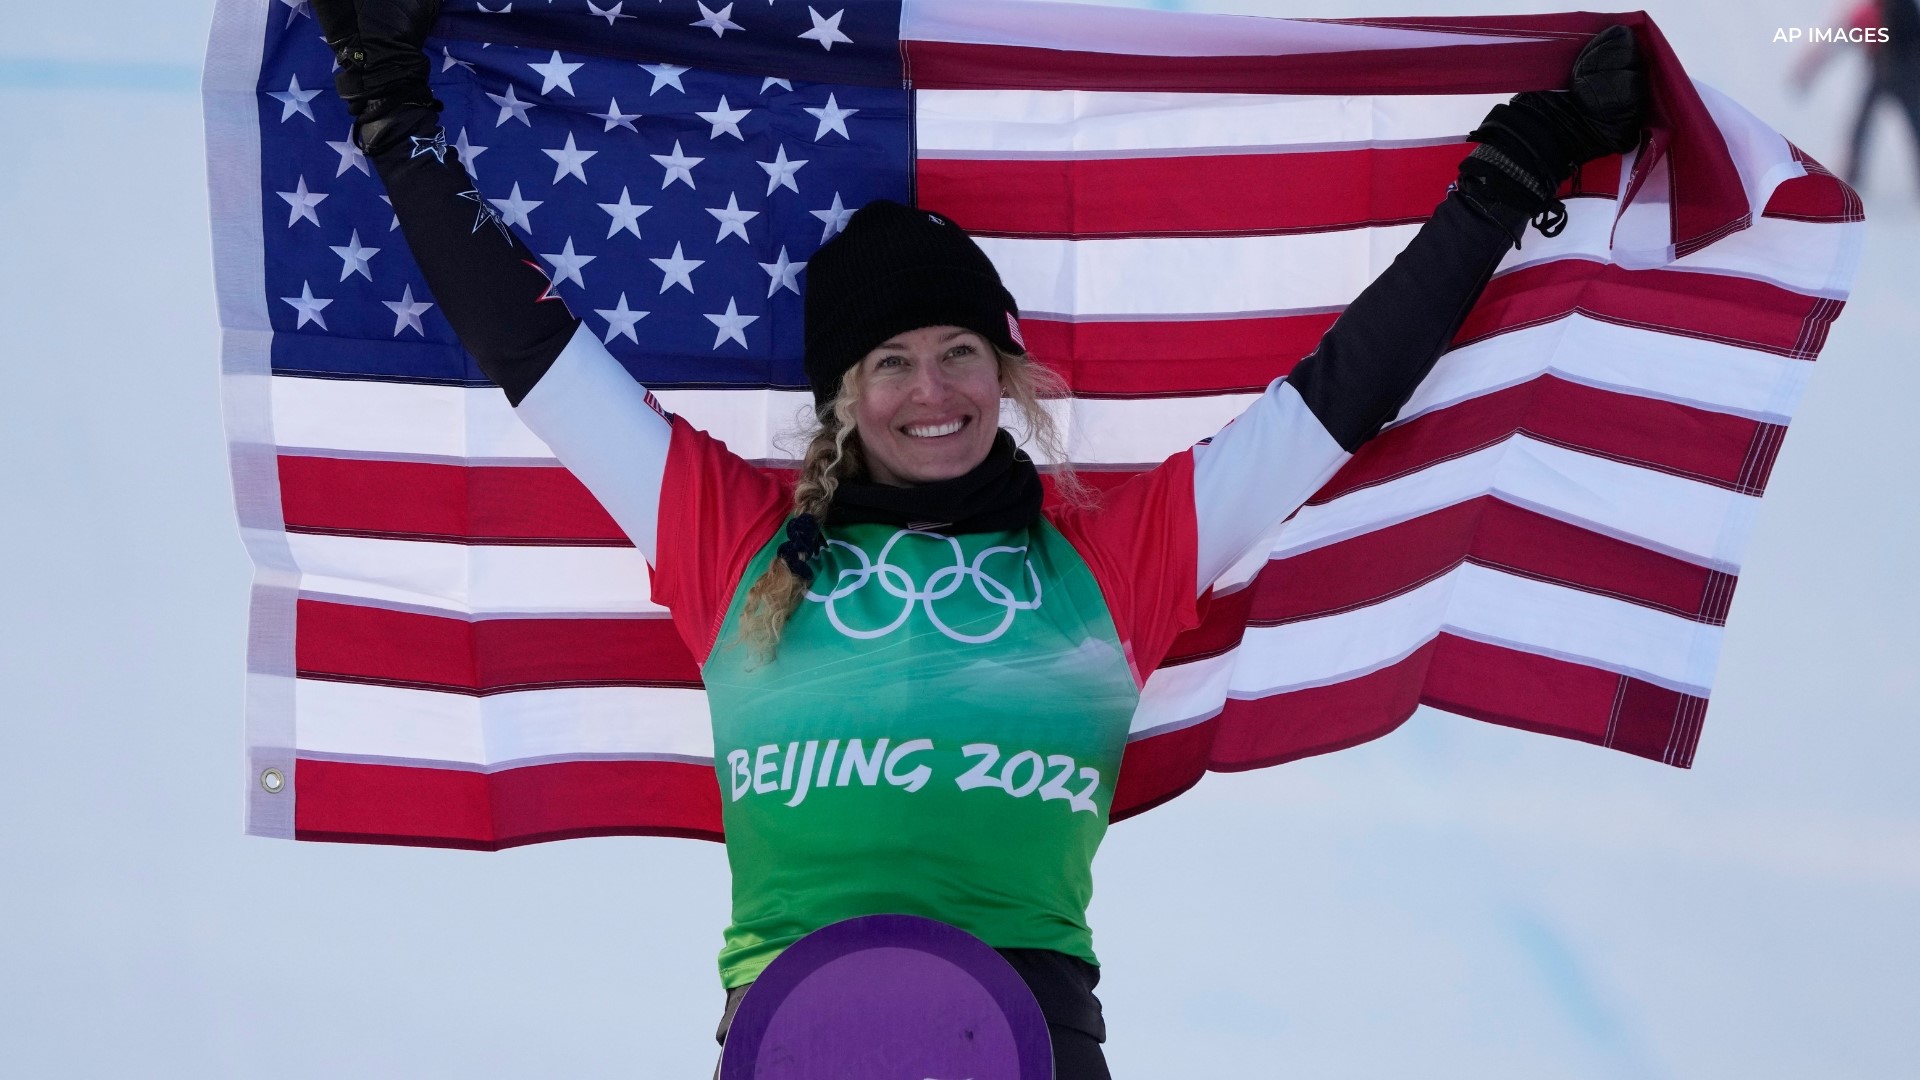 Lindsey Jacobellis led the pack to the finish line in the snowboardcross final and won Team USA's first gold medal in Beijing. This is her fifth Olympic appearance.